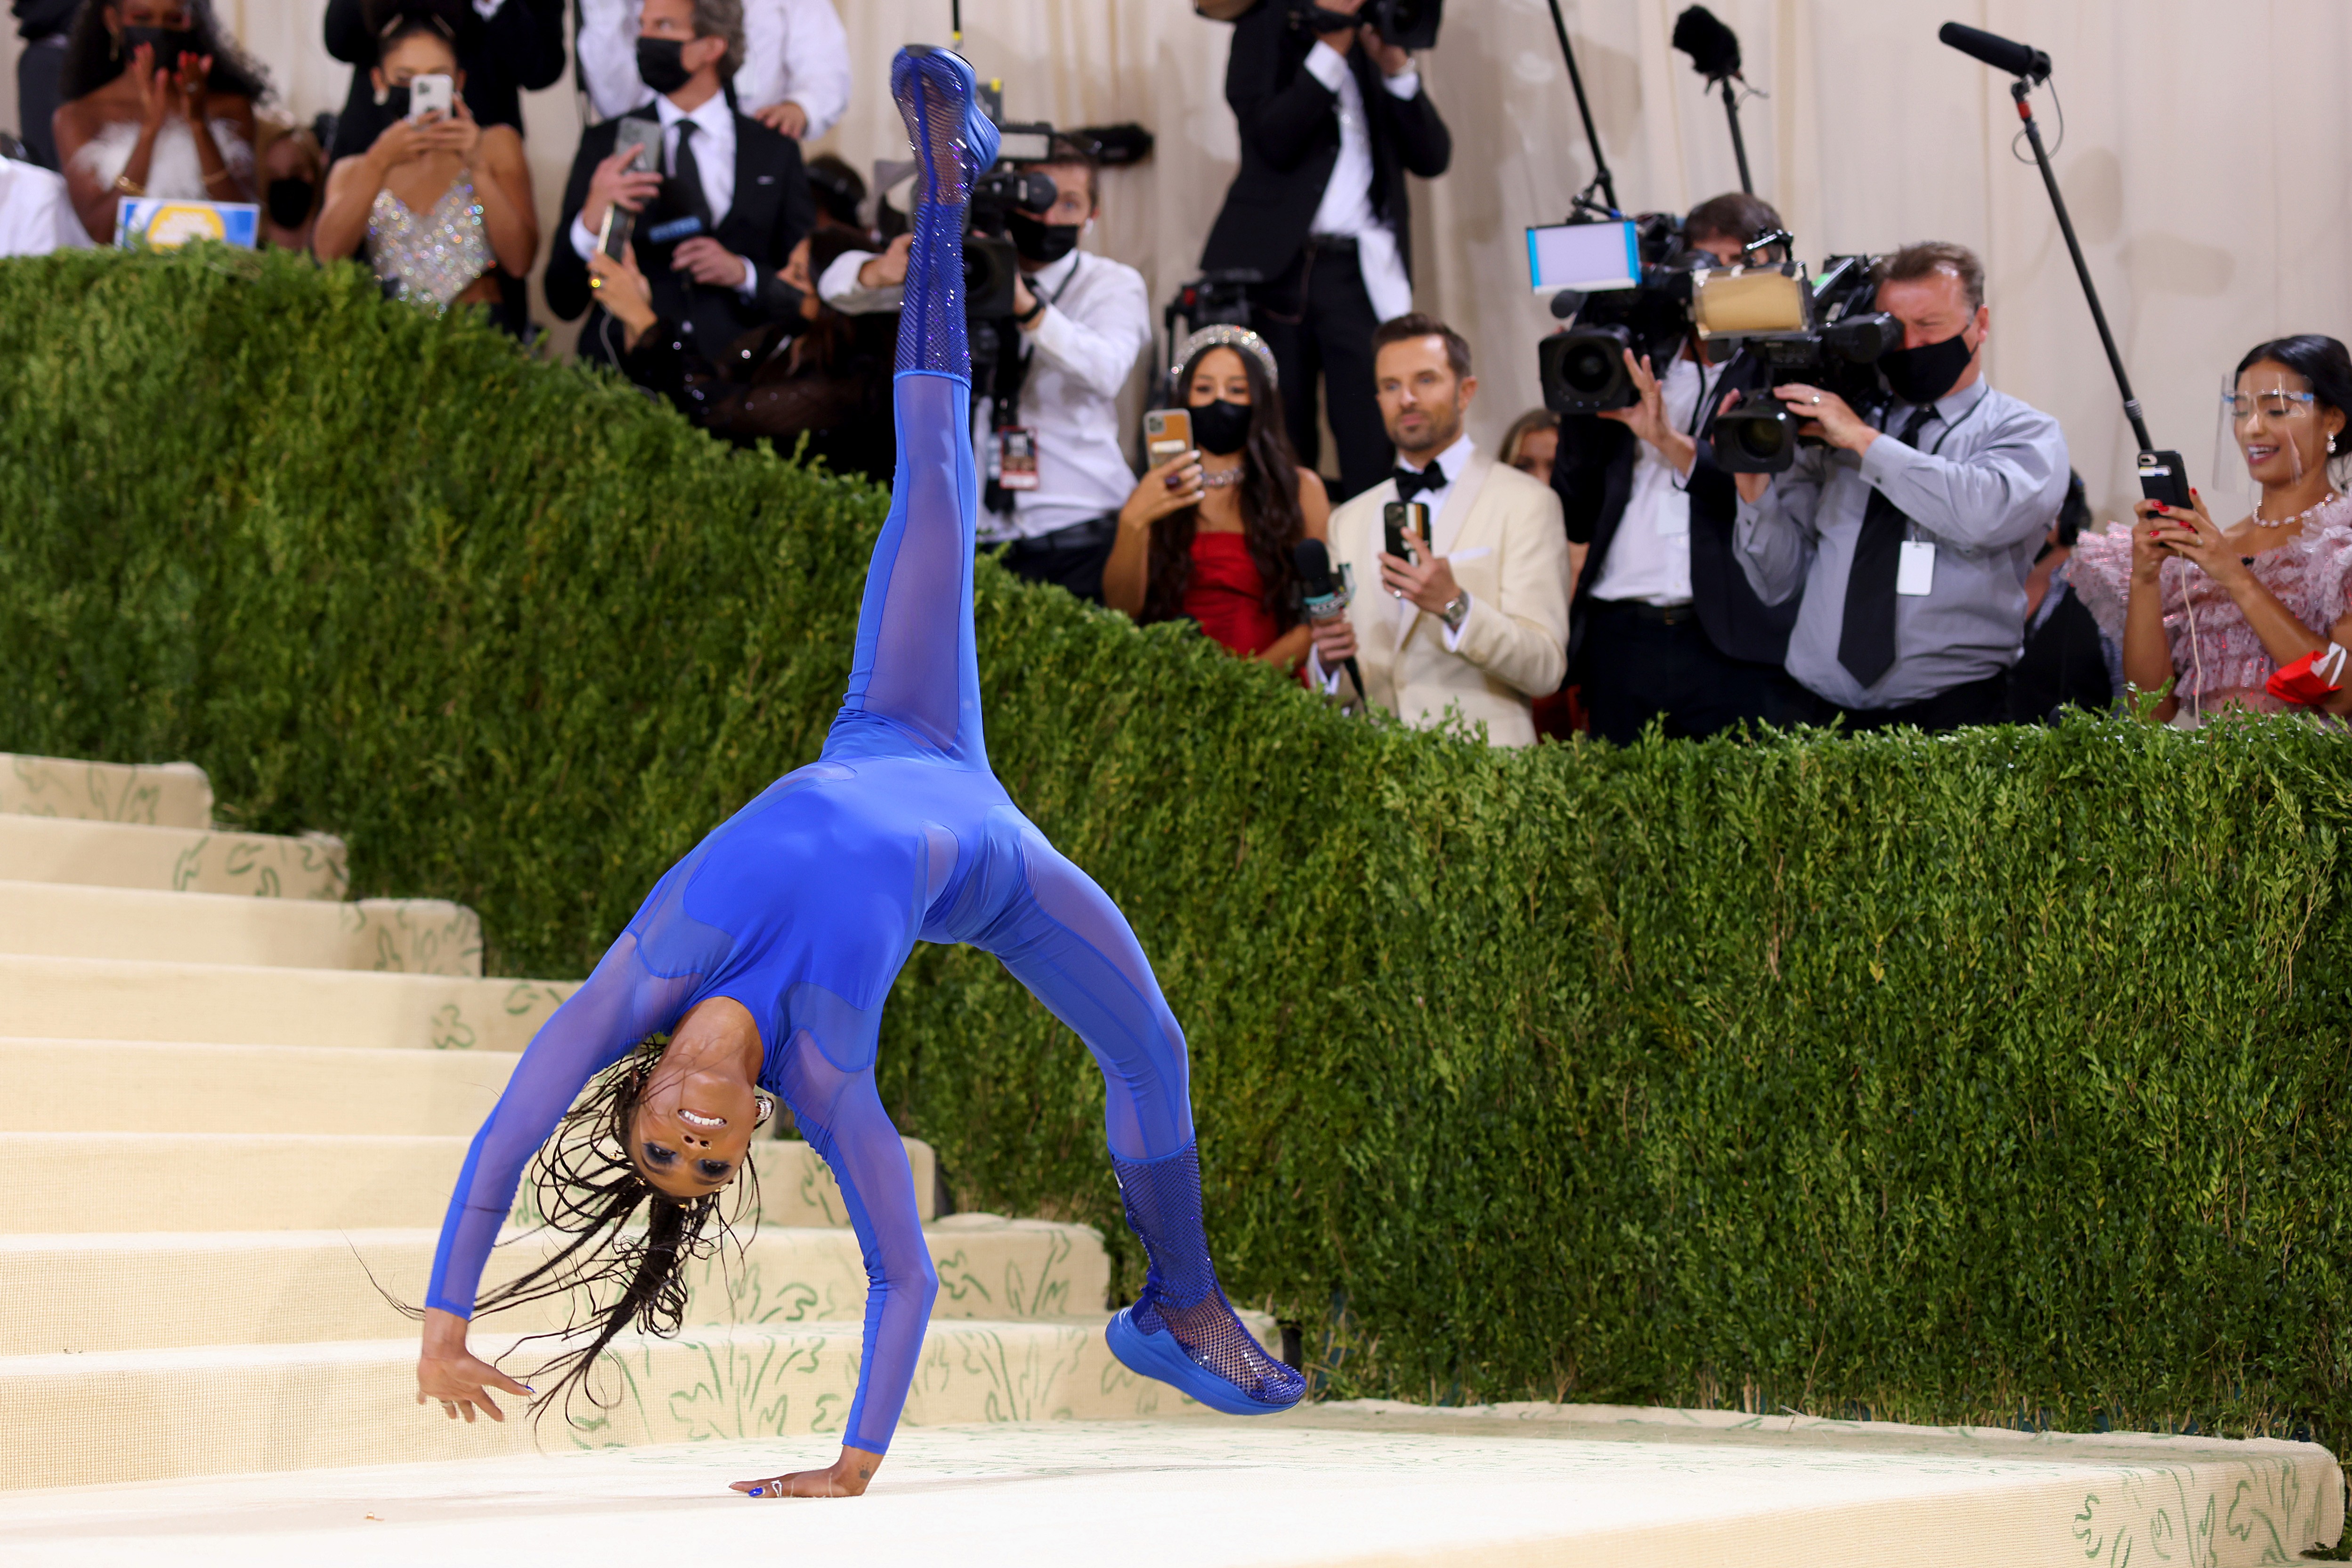 NEW YORK, NEW YORK - SEPTEMBER 13: Gymnast Nia Dennis attends The 2021 Met Gala Celebrating In America: A Lexicon Of Fashion at Metropolitan Museum of Art on September 13, 2021 in New York City. (Photo by John Shearer/WireImage) (Foto: WireImage)